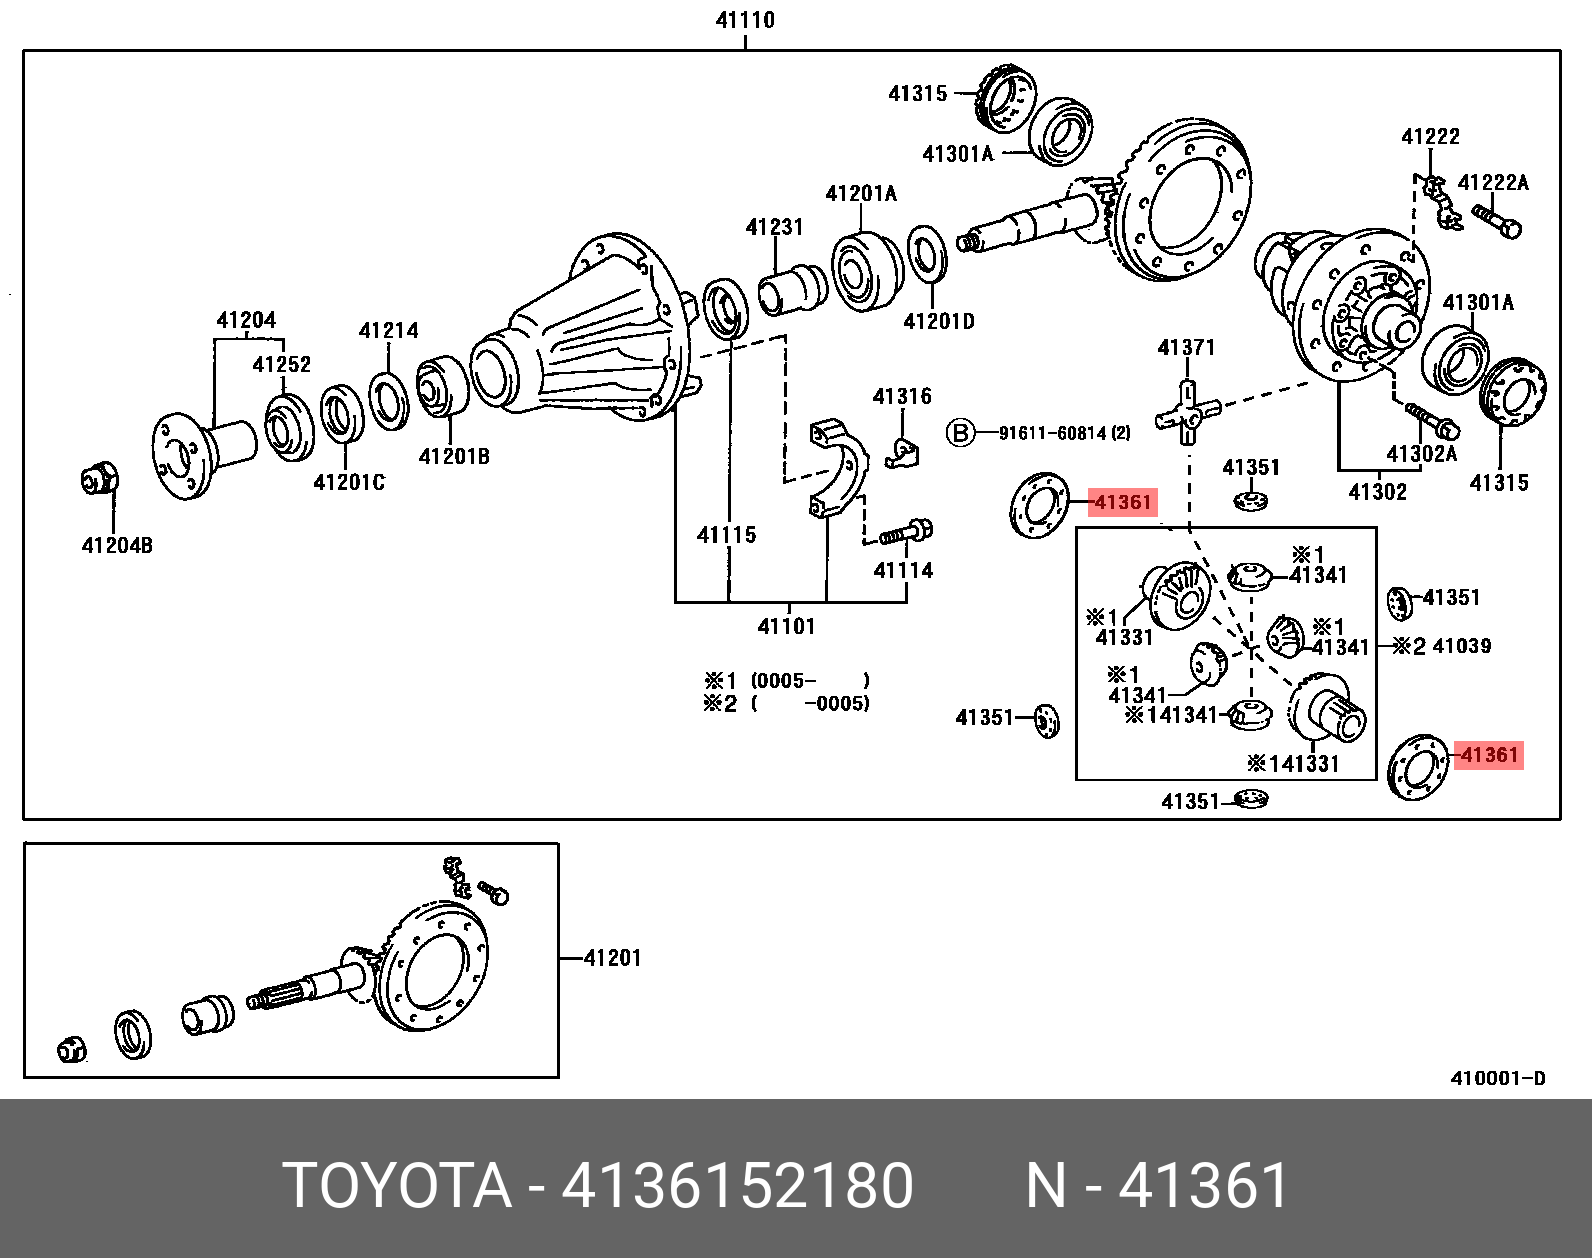 4136152180, YARIS 202002-, KSP210, MXPA1#, MXPH1#, WASHER, REAR DIFFERENTIAL SIDE GEAR THRUST, NO.1